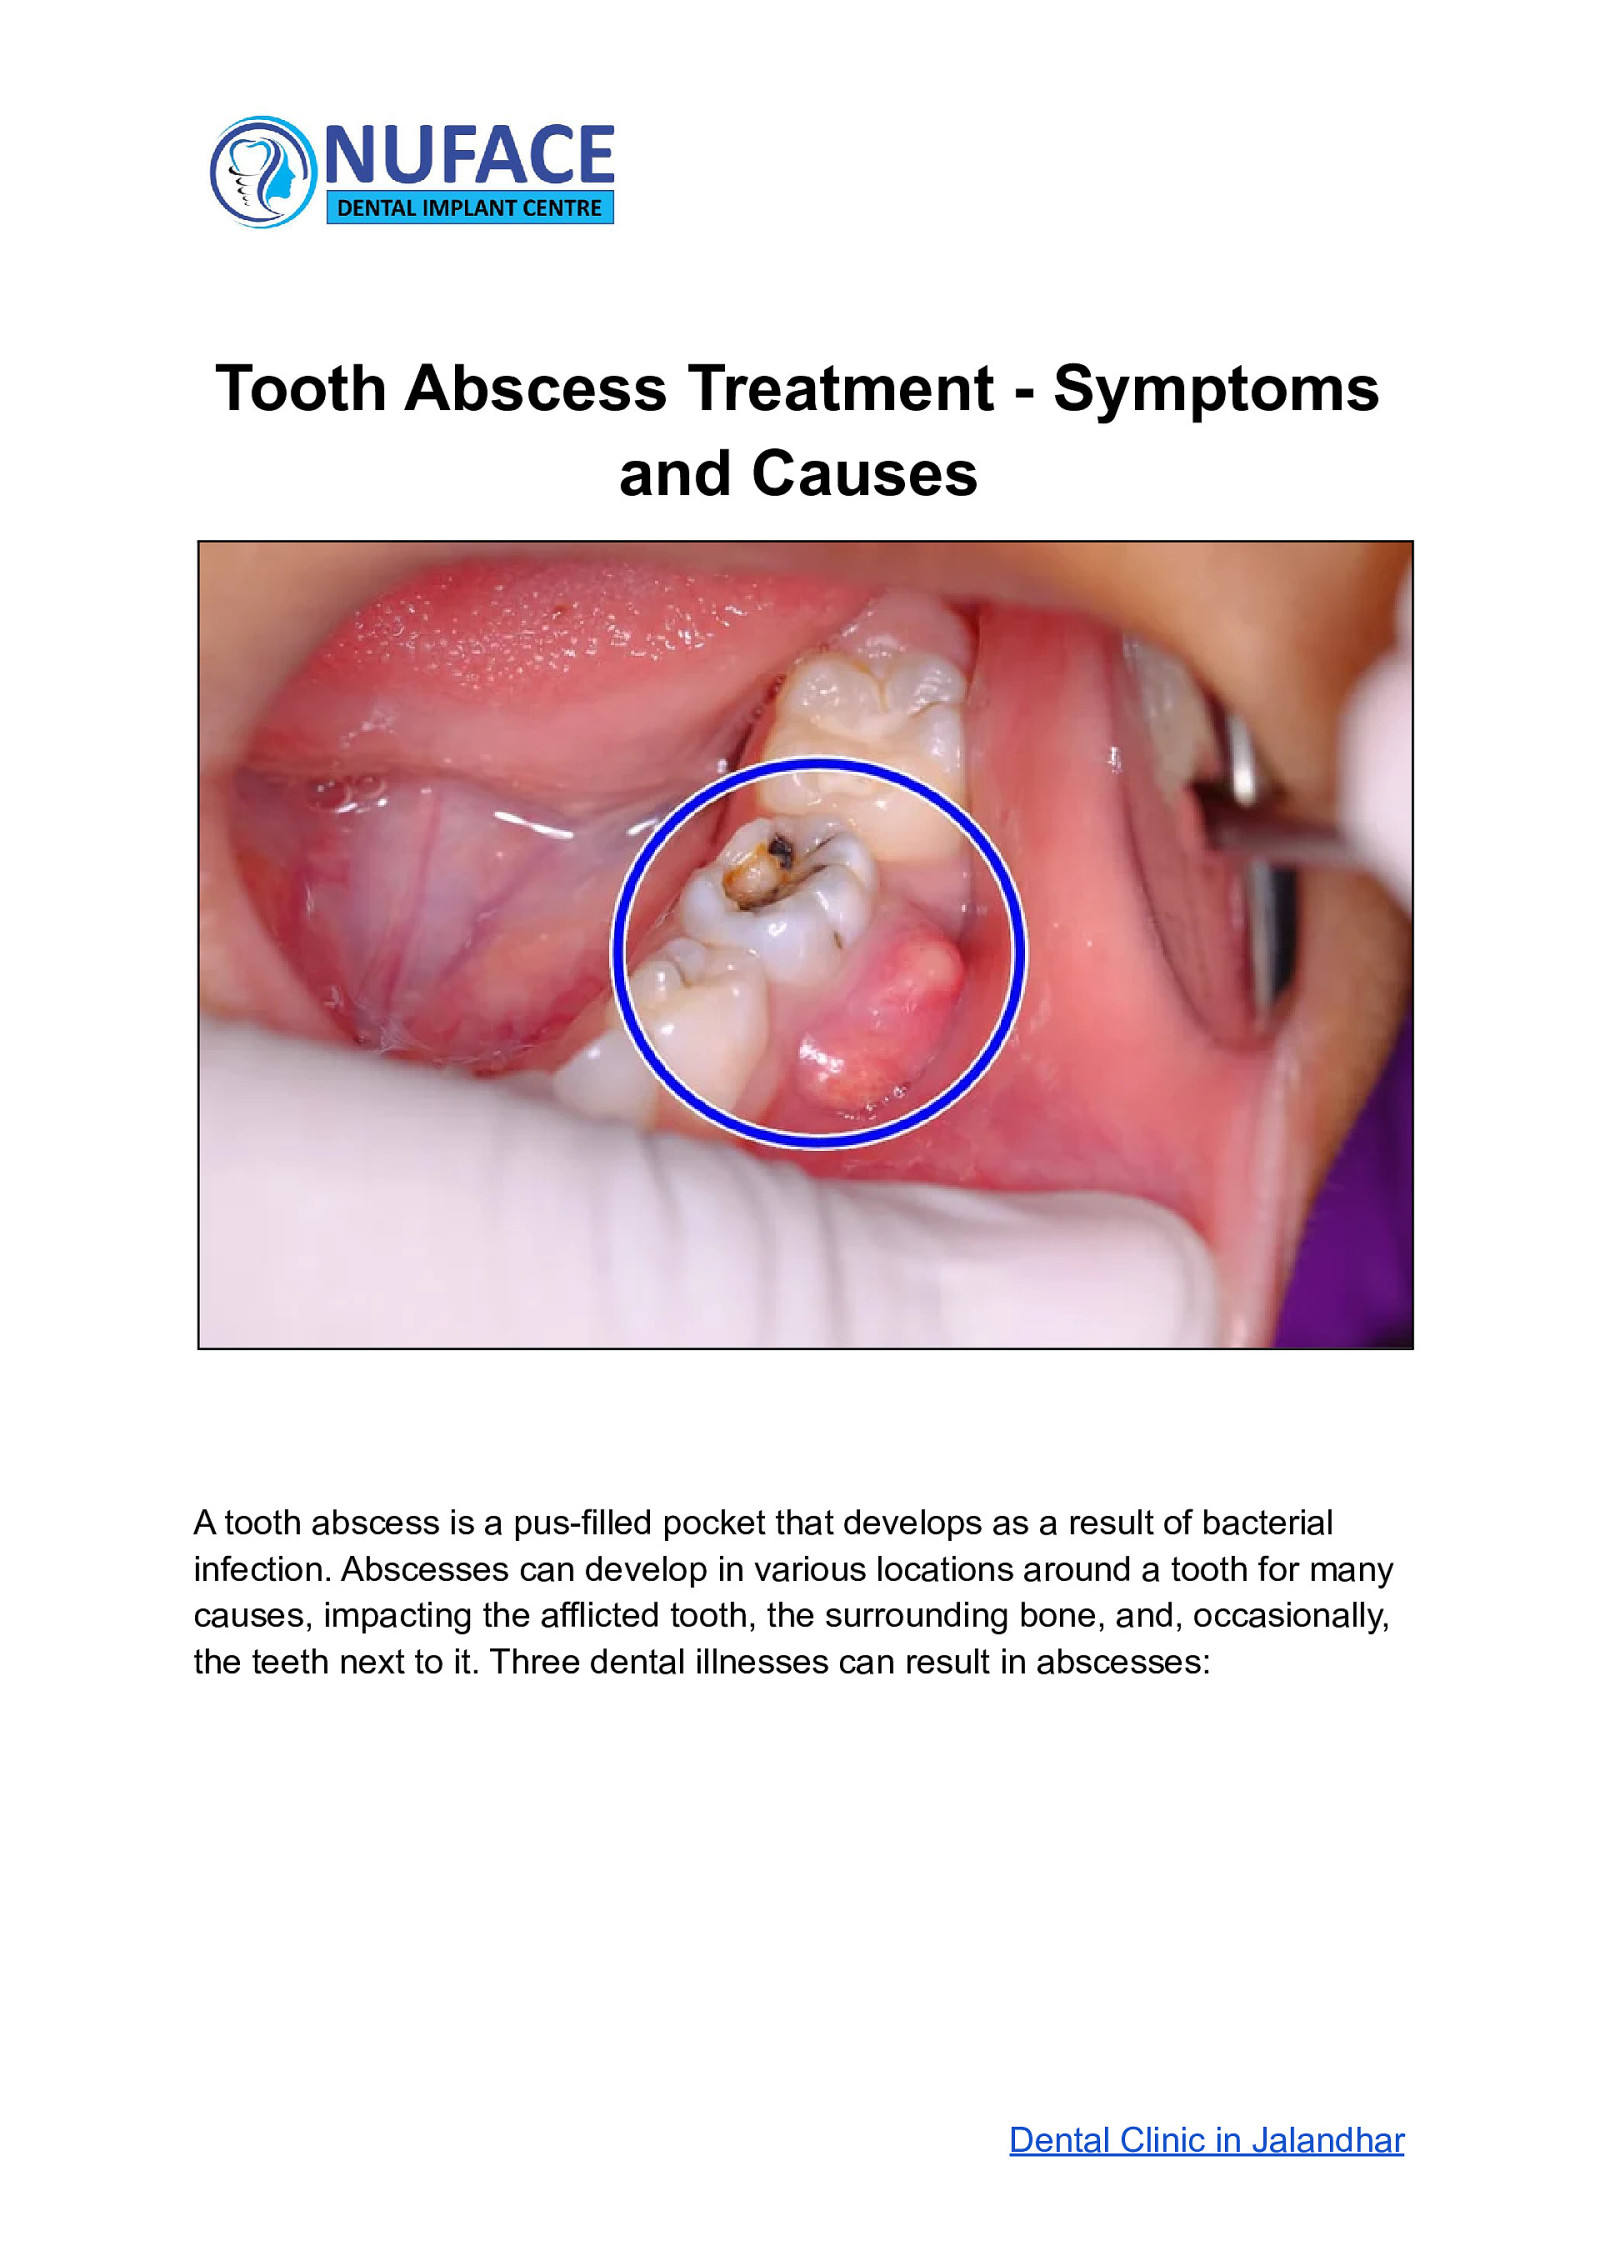 Tooth Abscess Treatment - Symptoms and Causes